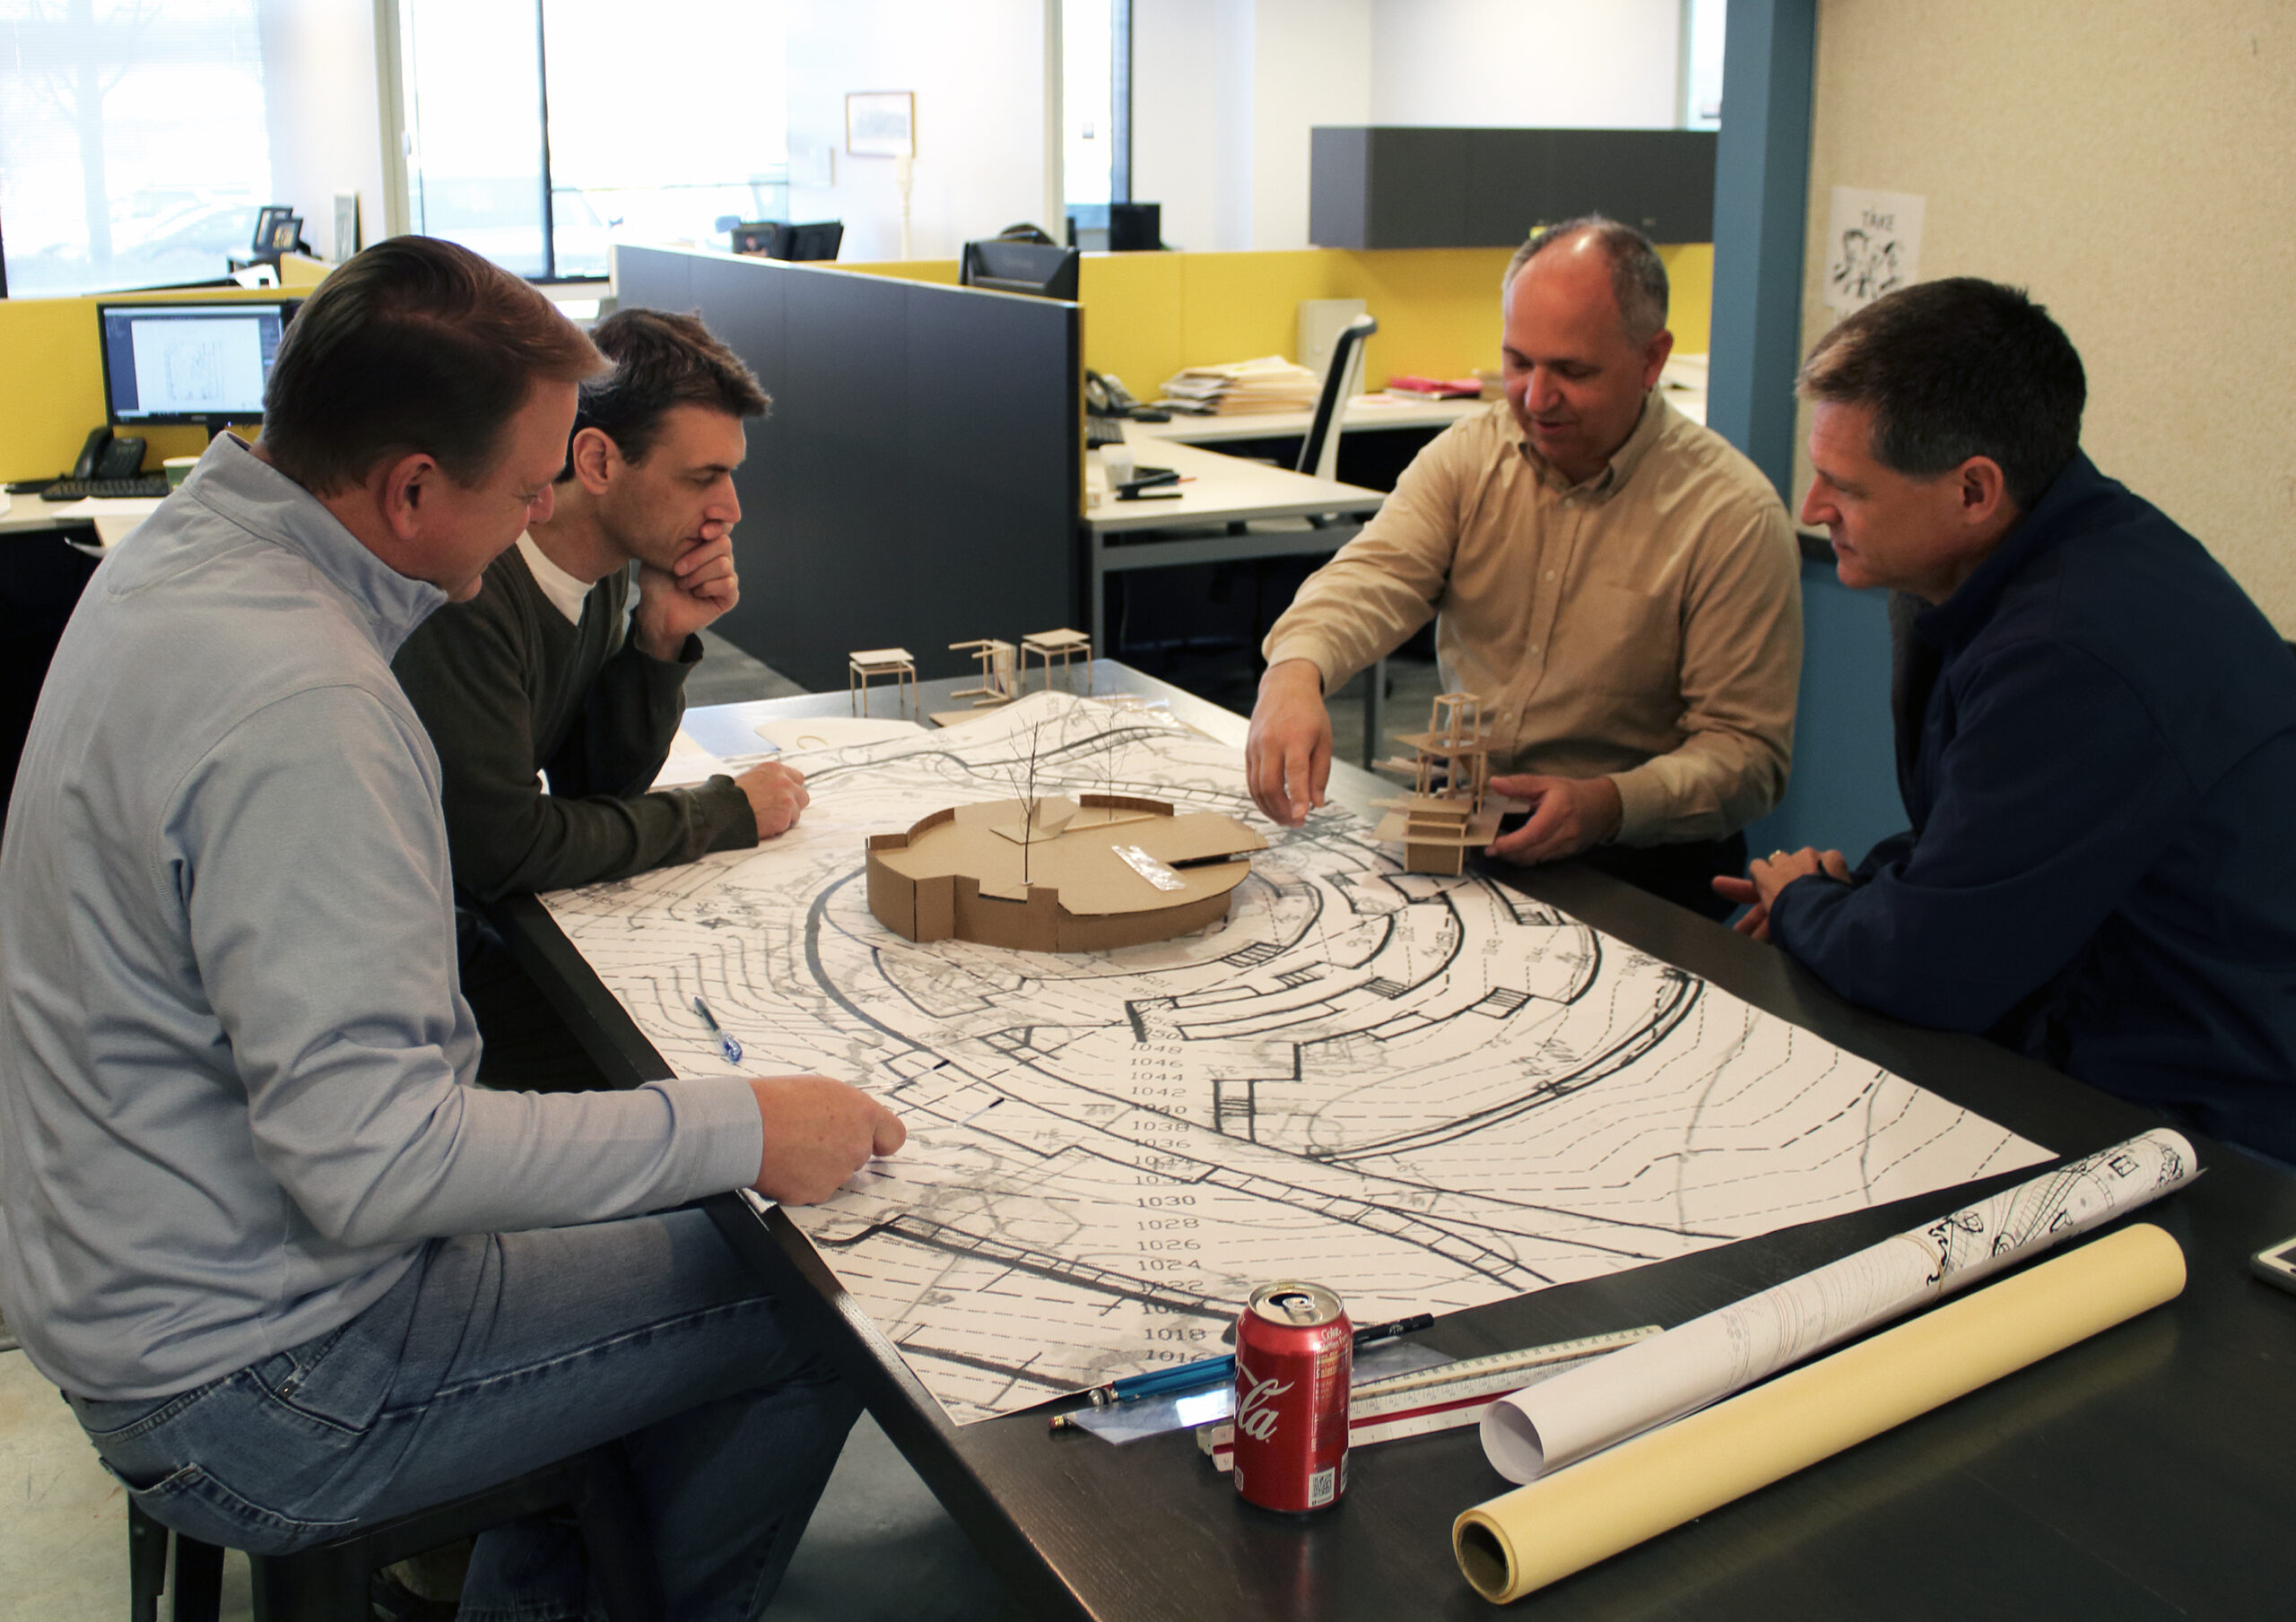 Image shows 4 men sitting around a table and discussing the transportation design architectural plans that are in front of them.